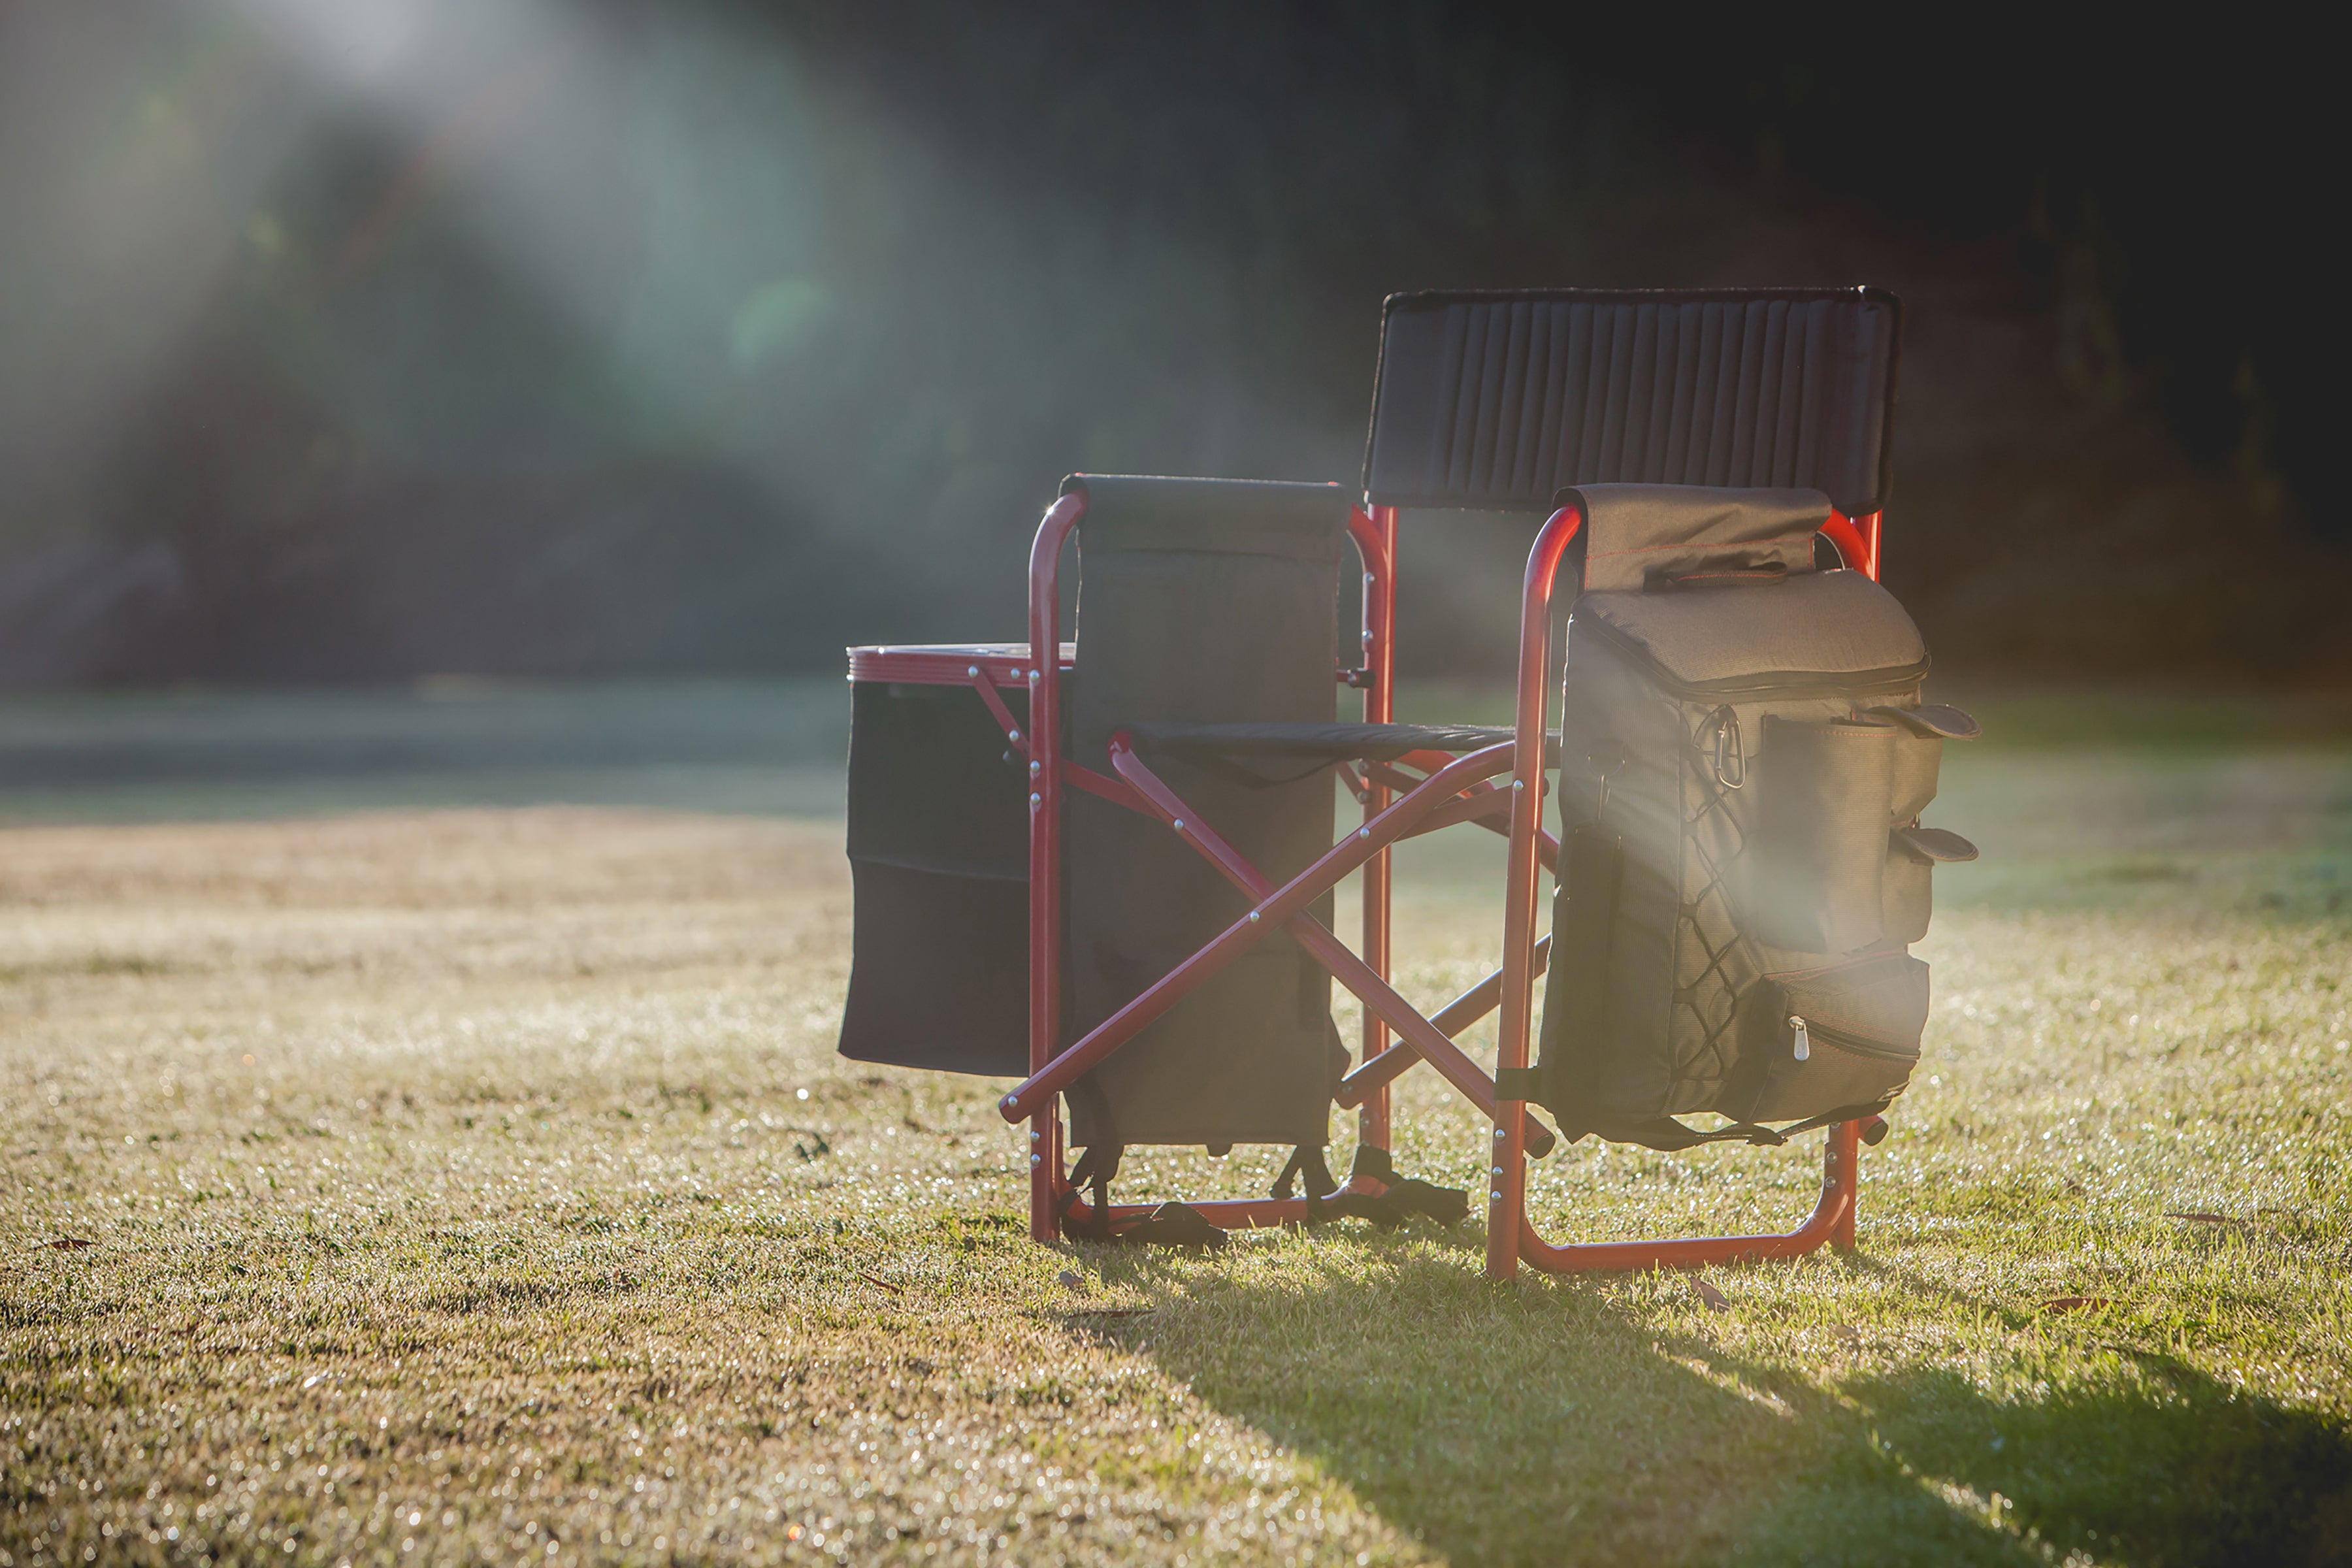 Boston Red Sox - Fusion Camping Chair